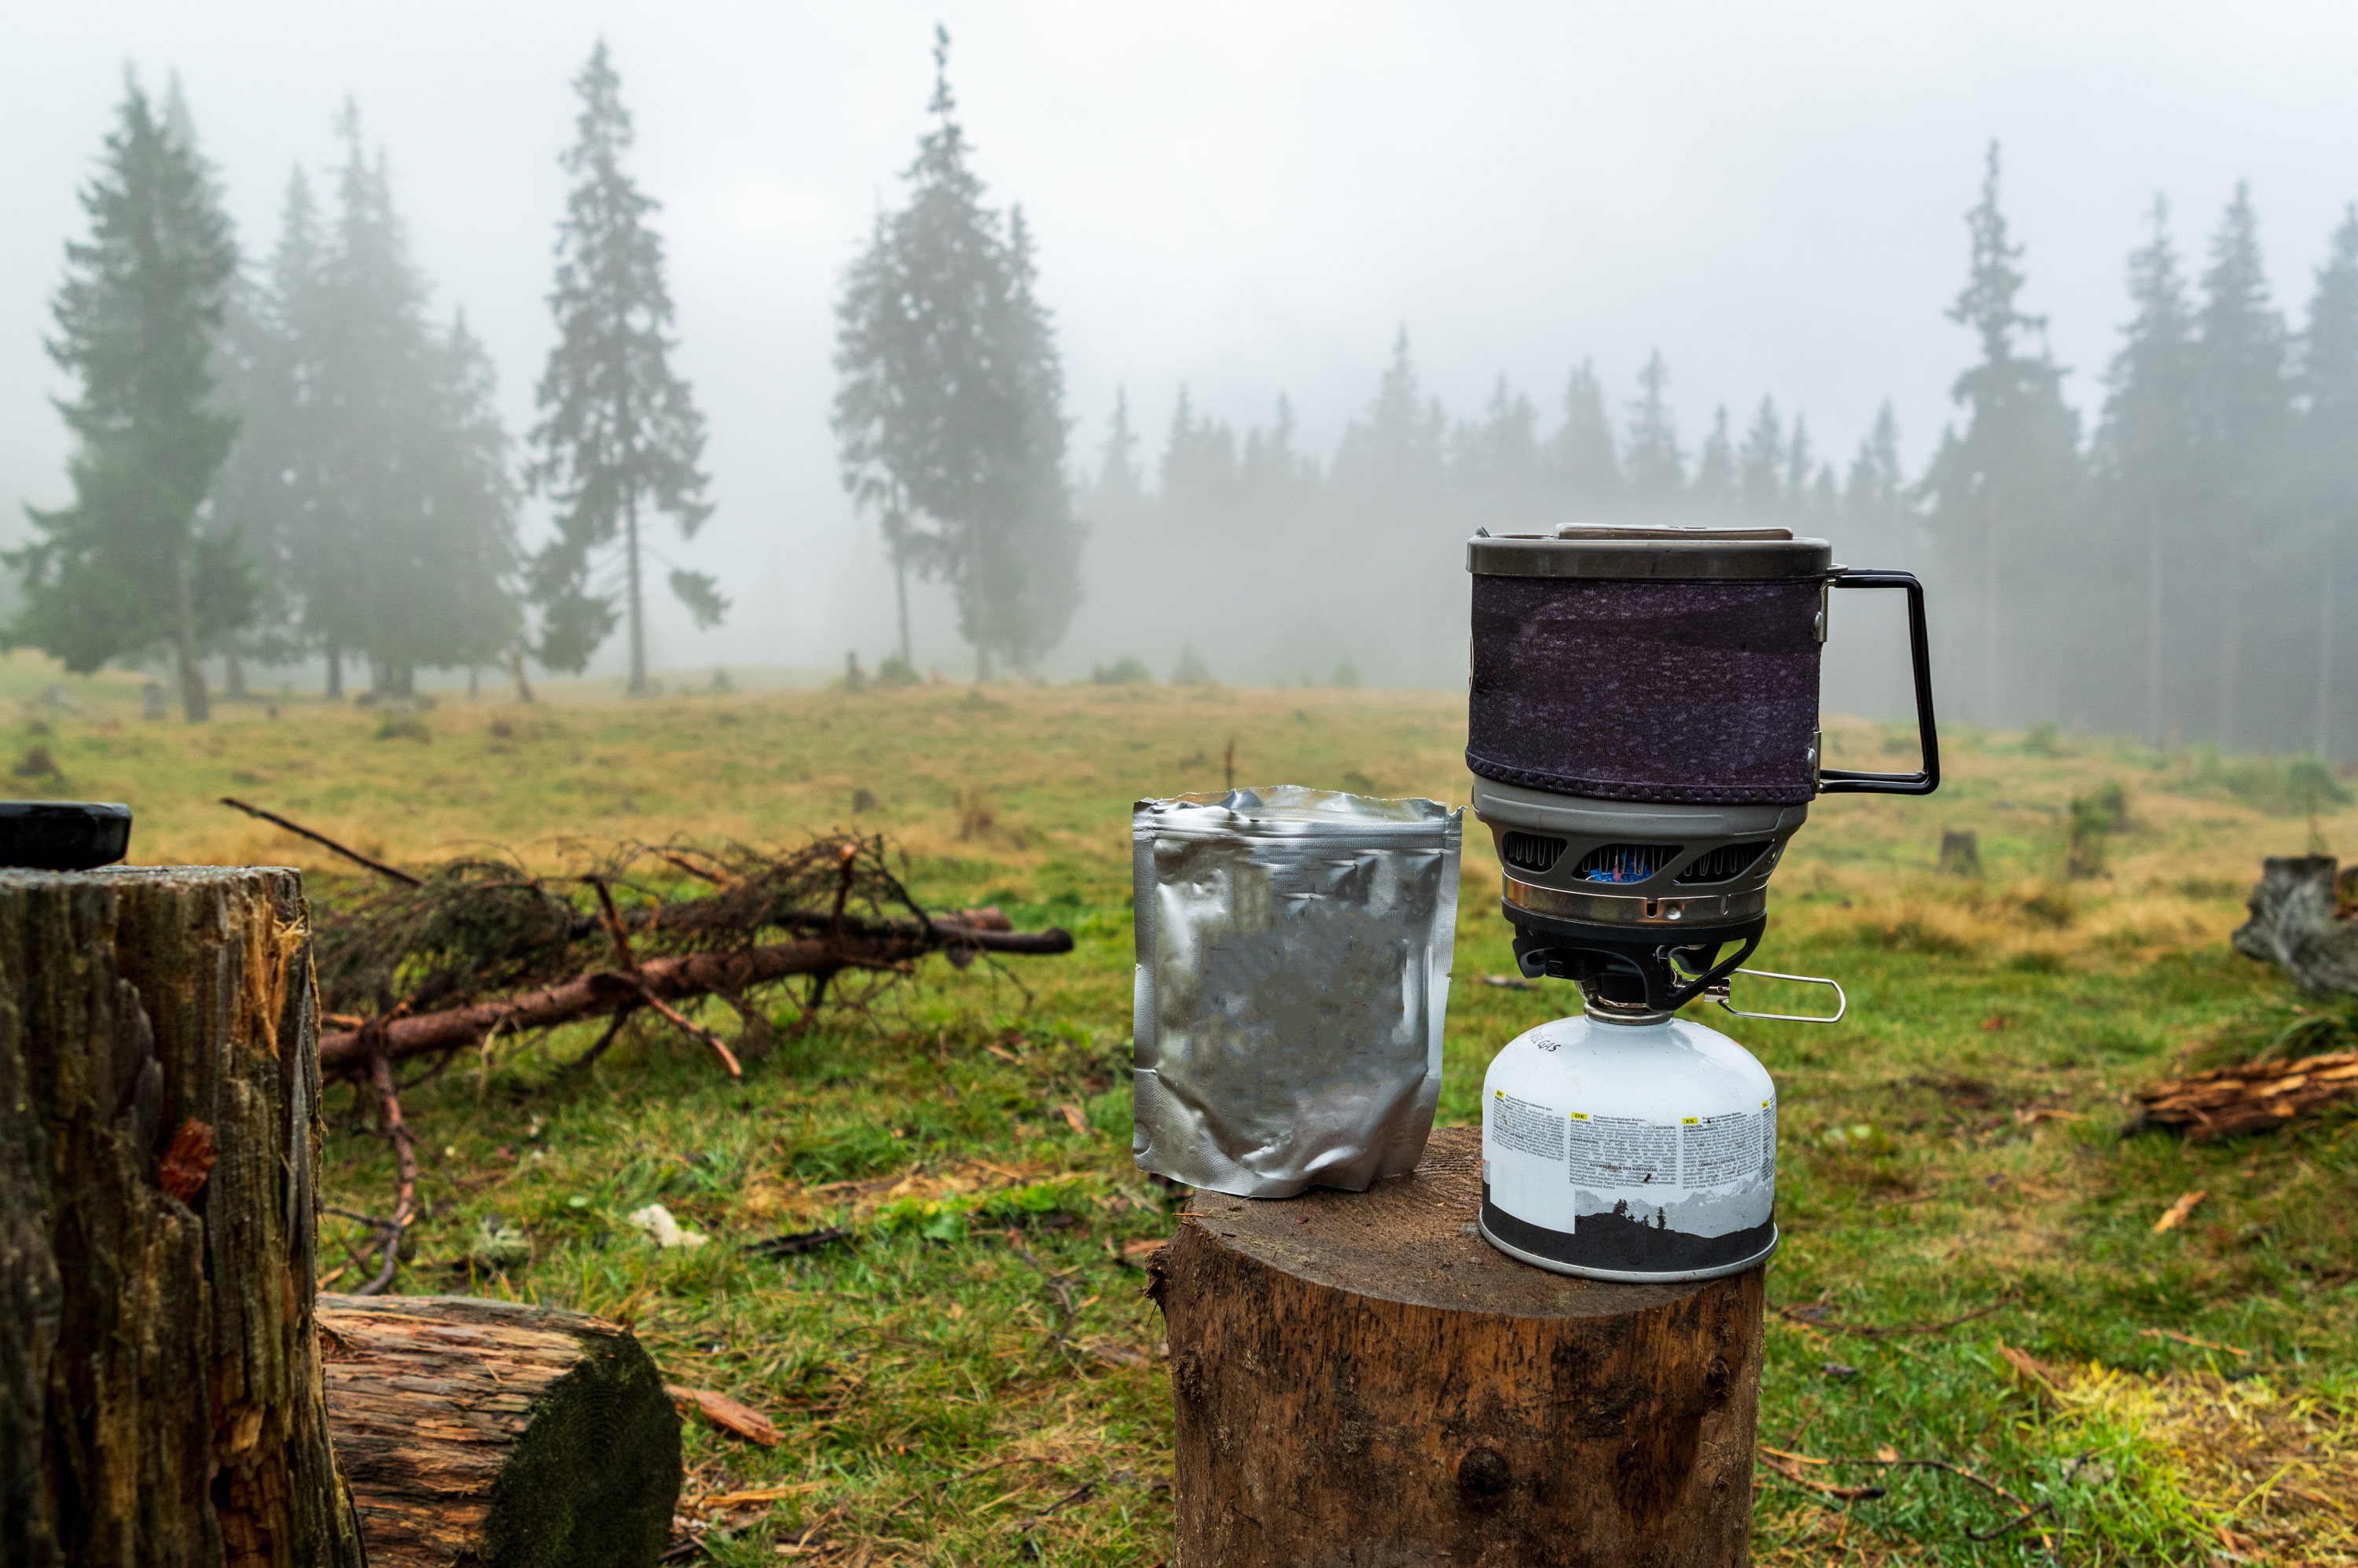 Jetboil and meal packet